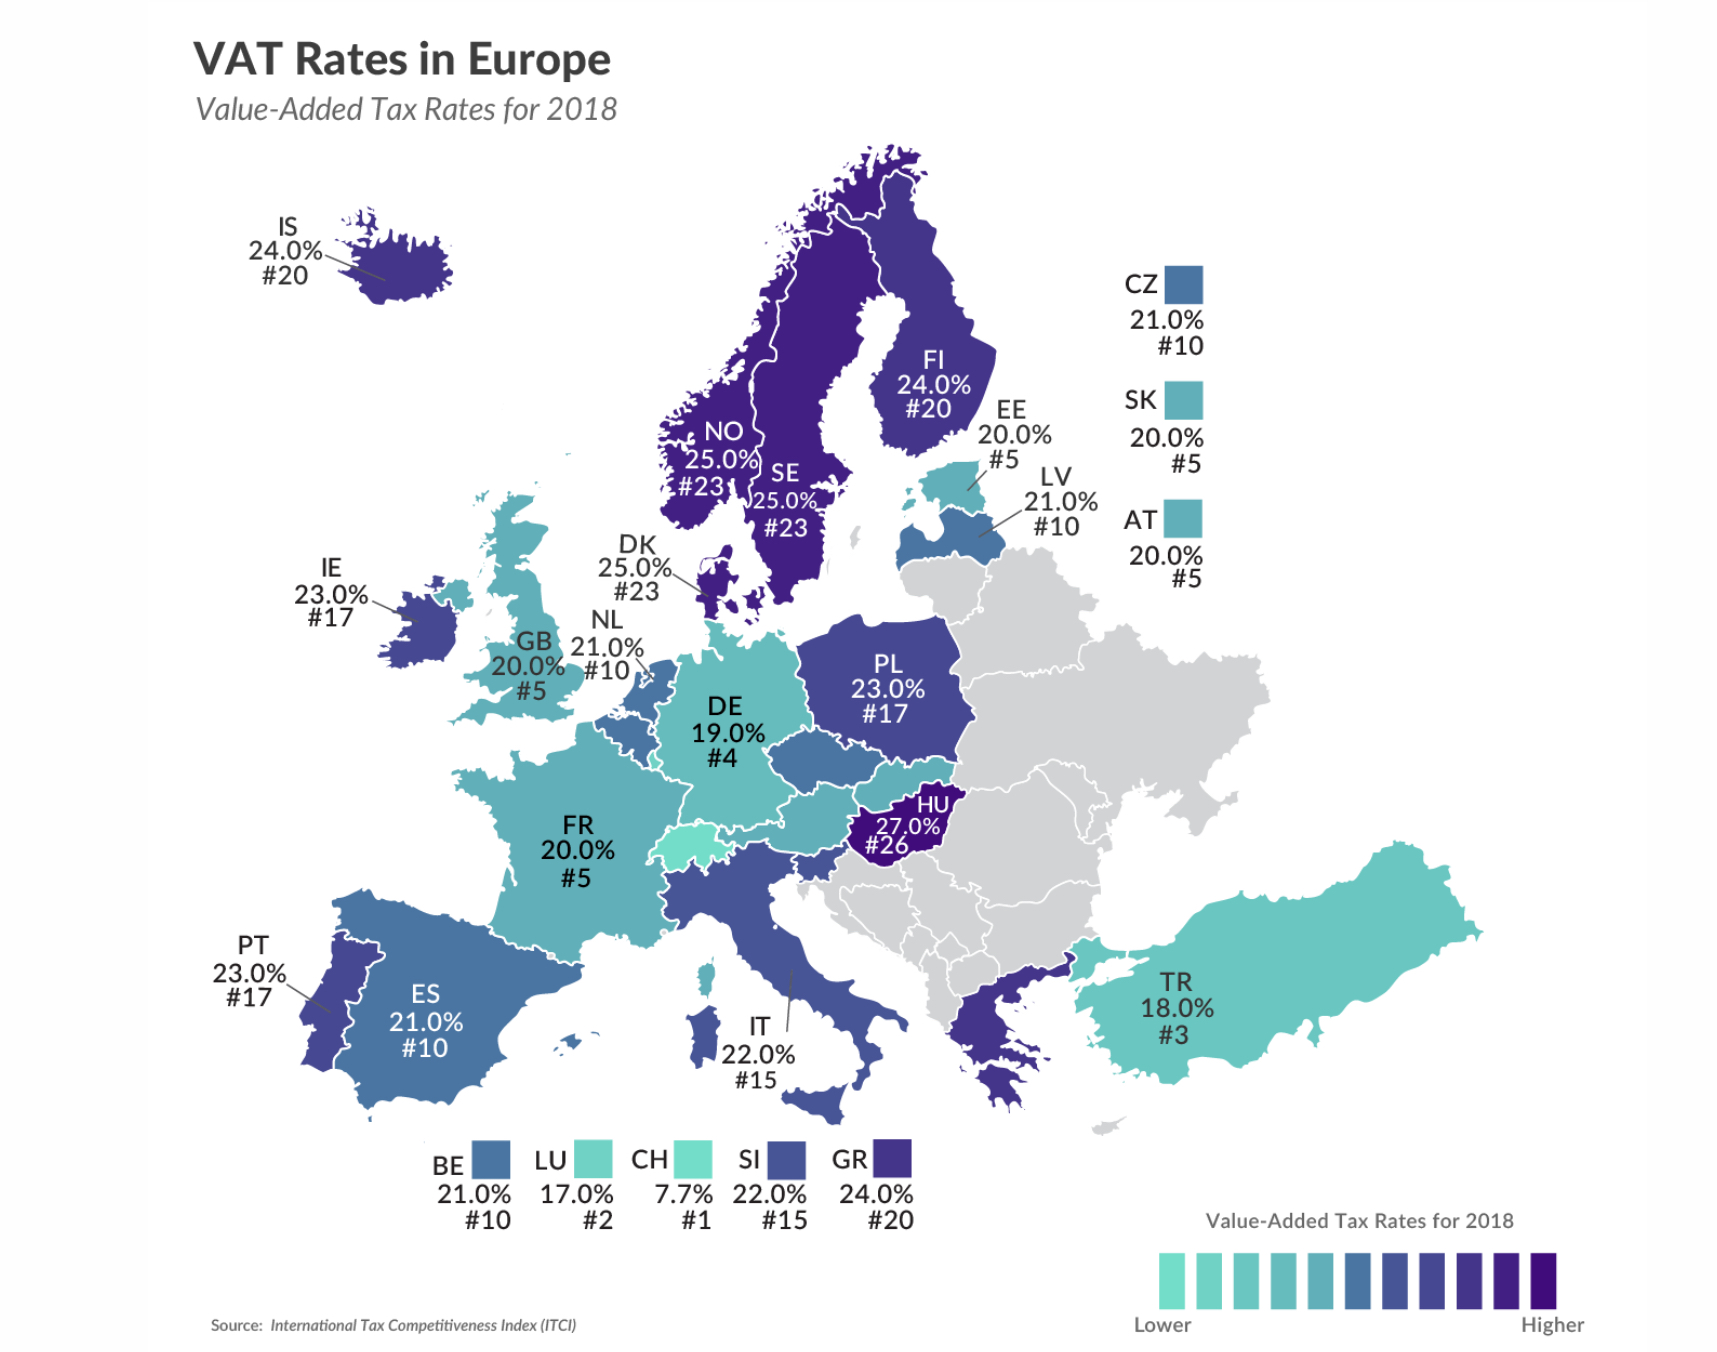 VAT Rates in Europe Taxfoundation.org